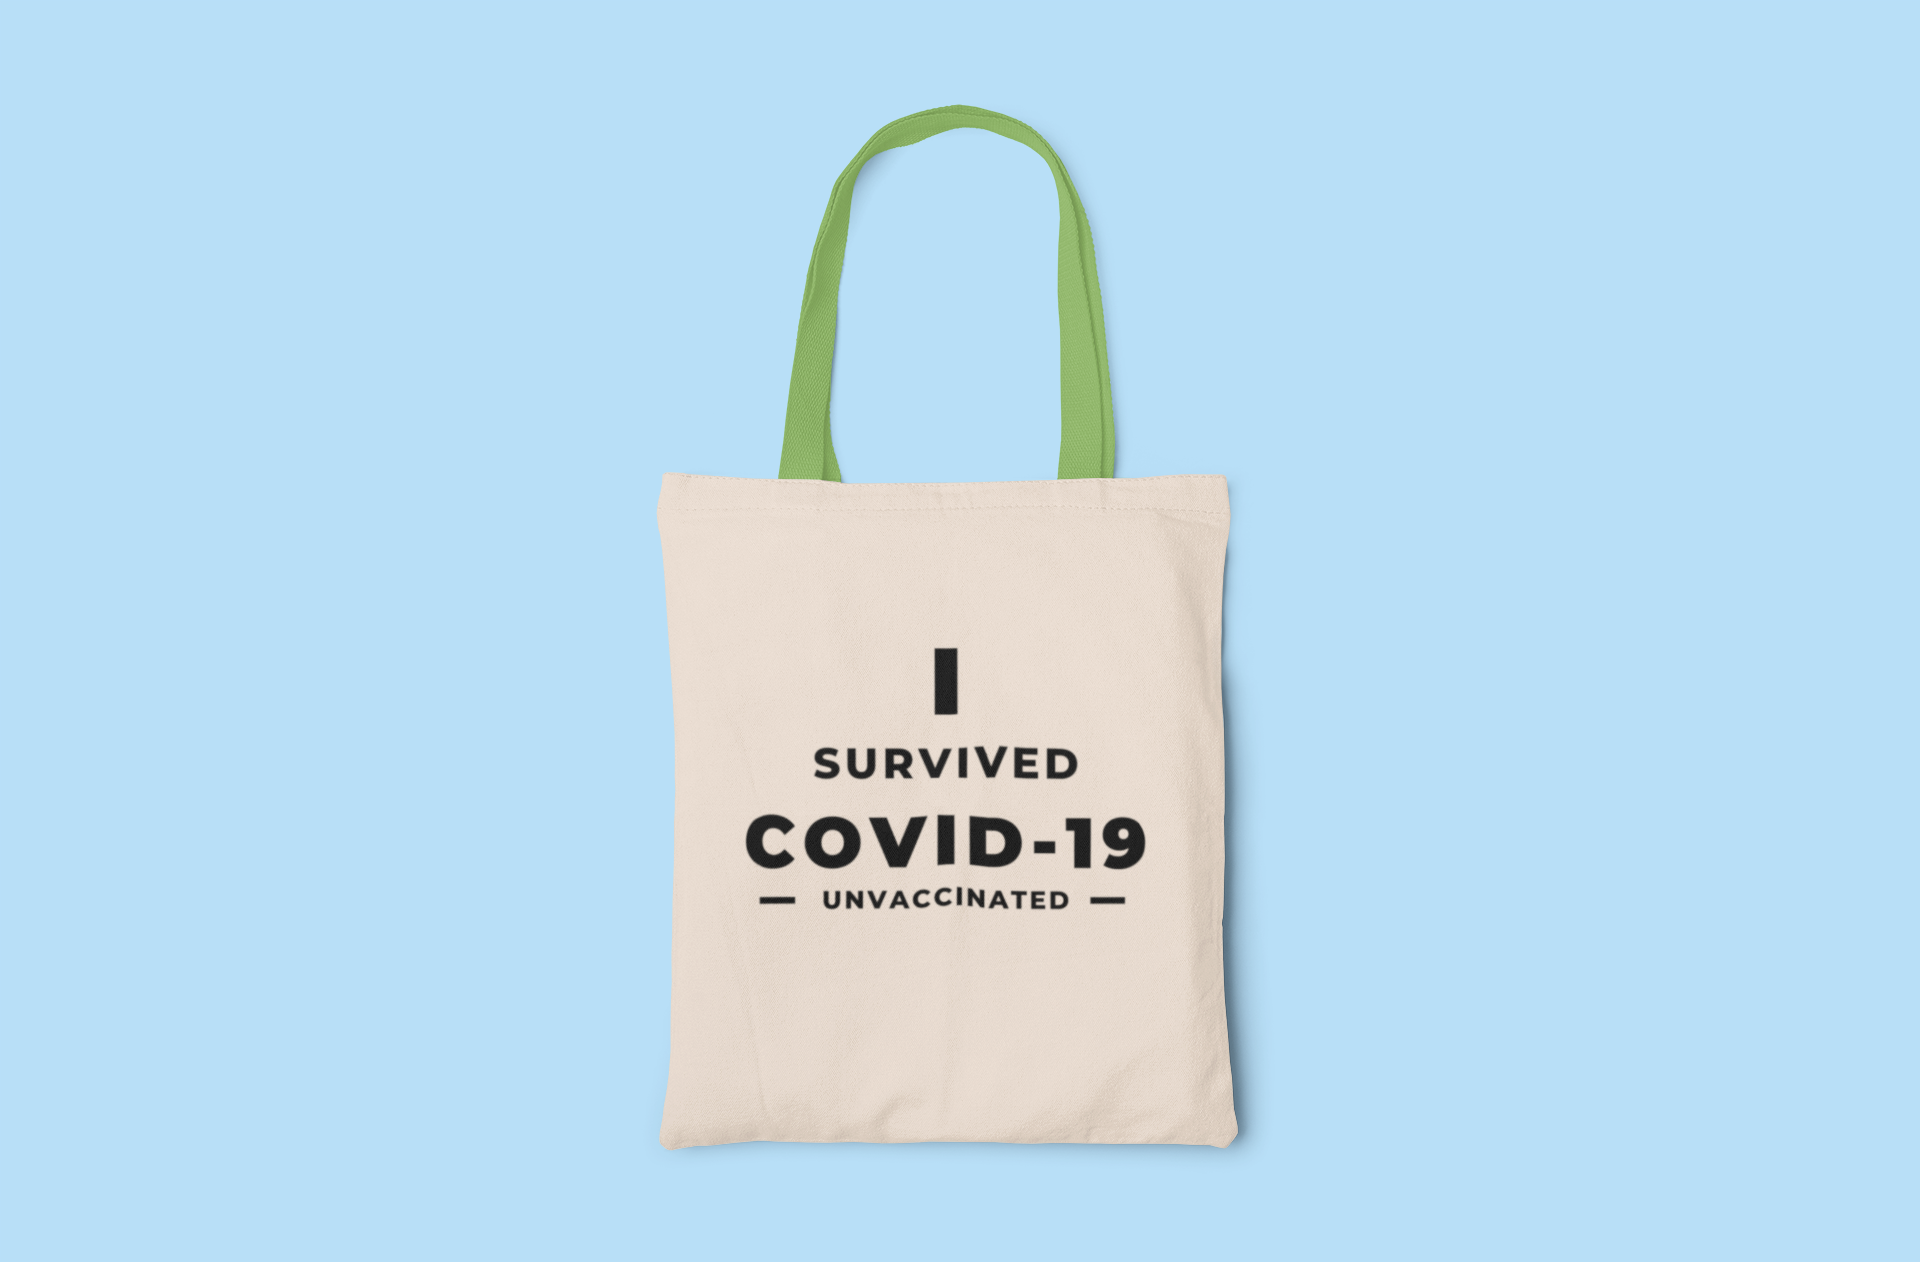 In Survived Covid-19 Tote Bag